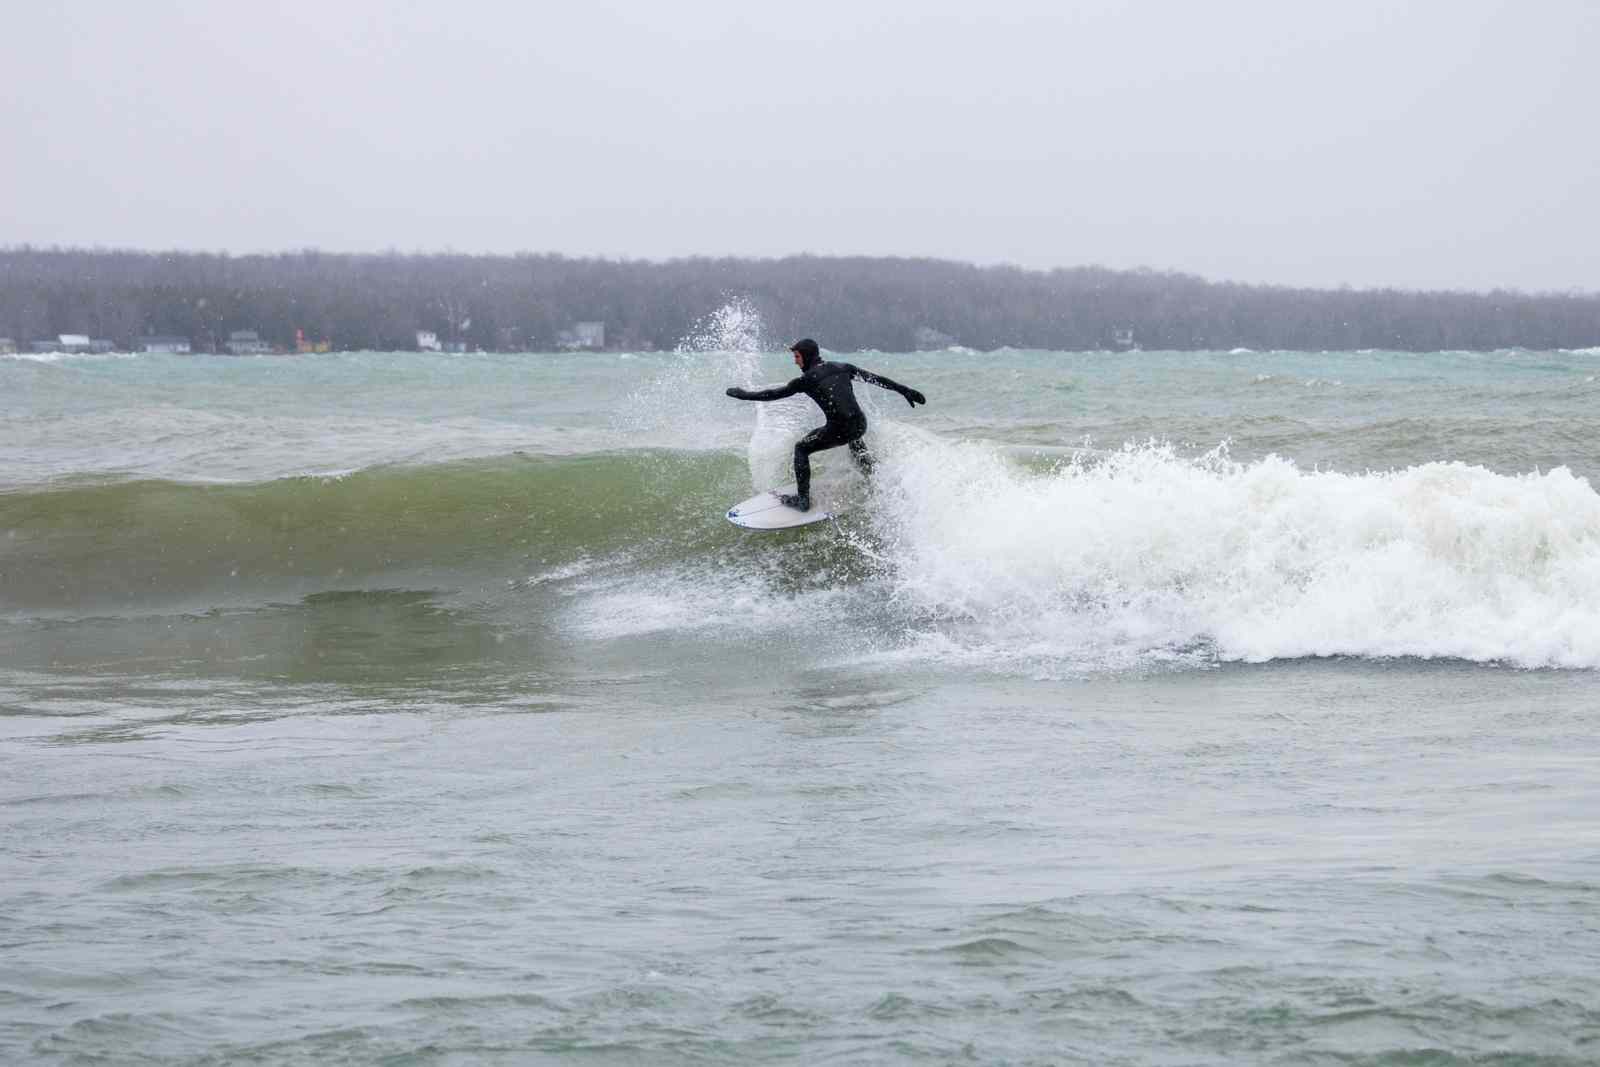 Man in a wetsuit surfs on a Great Lake in winter